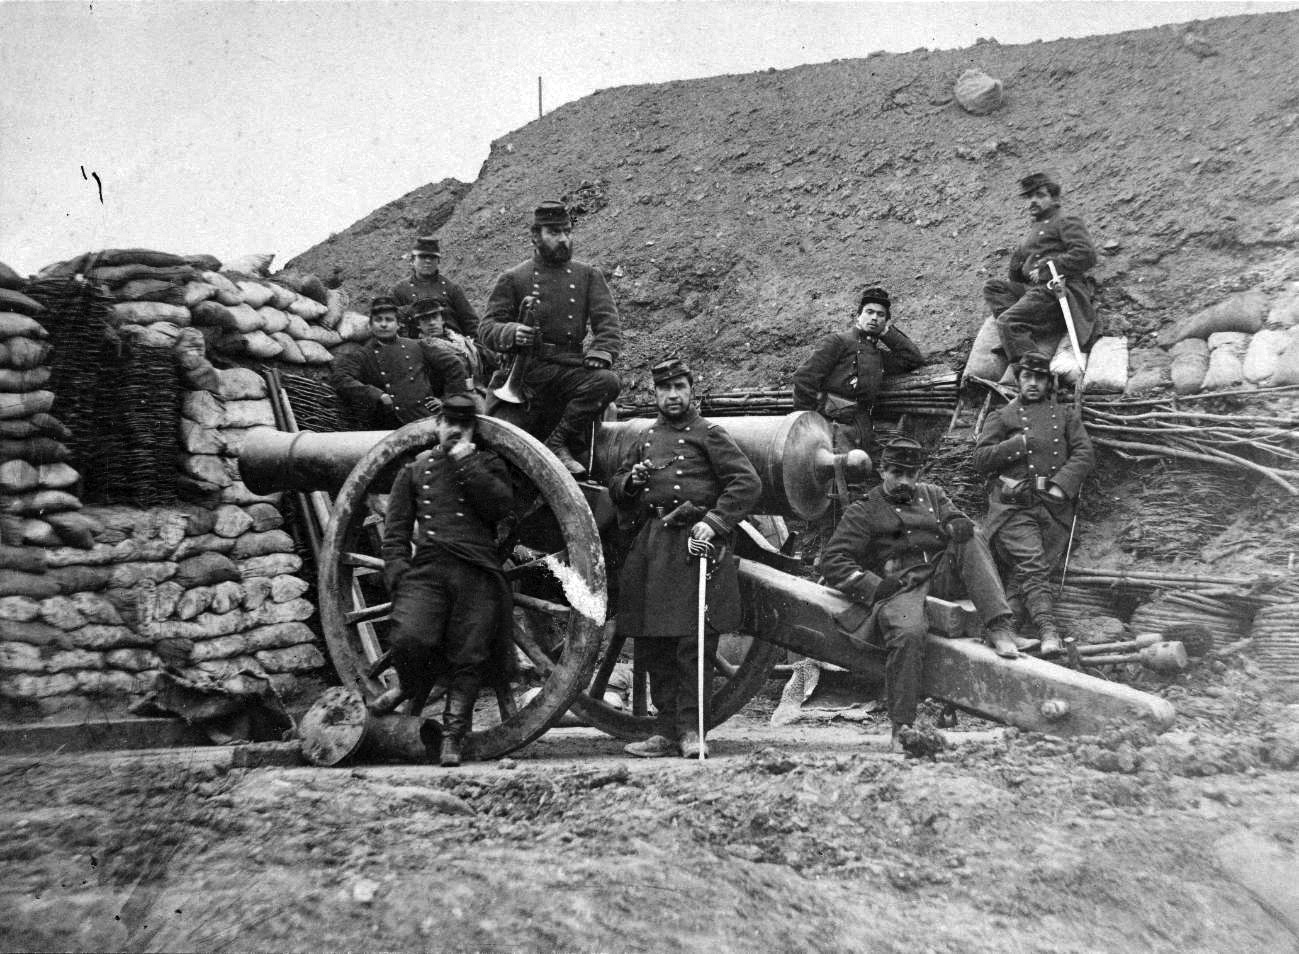 A French artillery crew is shown posing with a heavy gun during the Franco-Prussian War. The French muzzle-loading artillery was no match for the superior breech-loading Prussian guns, which the Prussians massed at key positions to overwhelm French defenses during the fighting at Gravelotte-Saint-Privat.